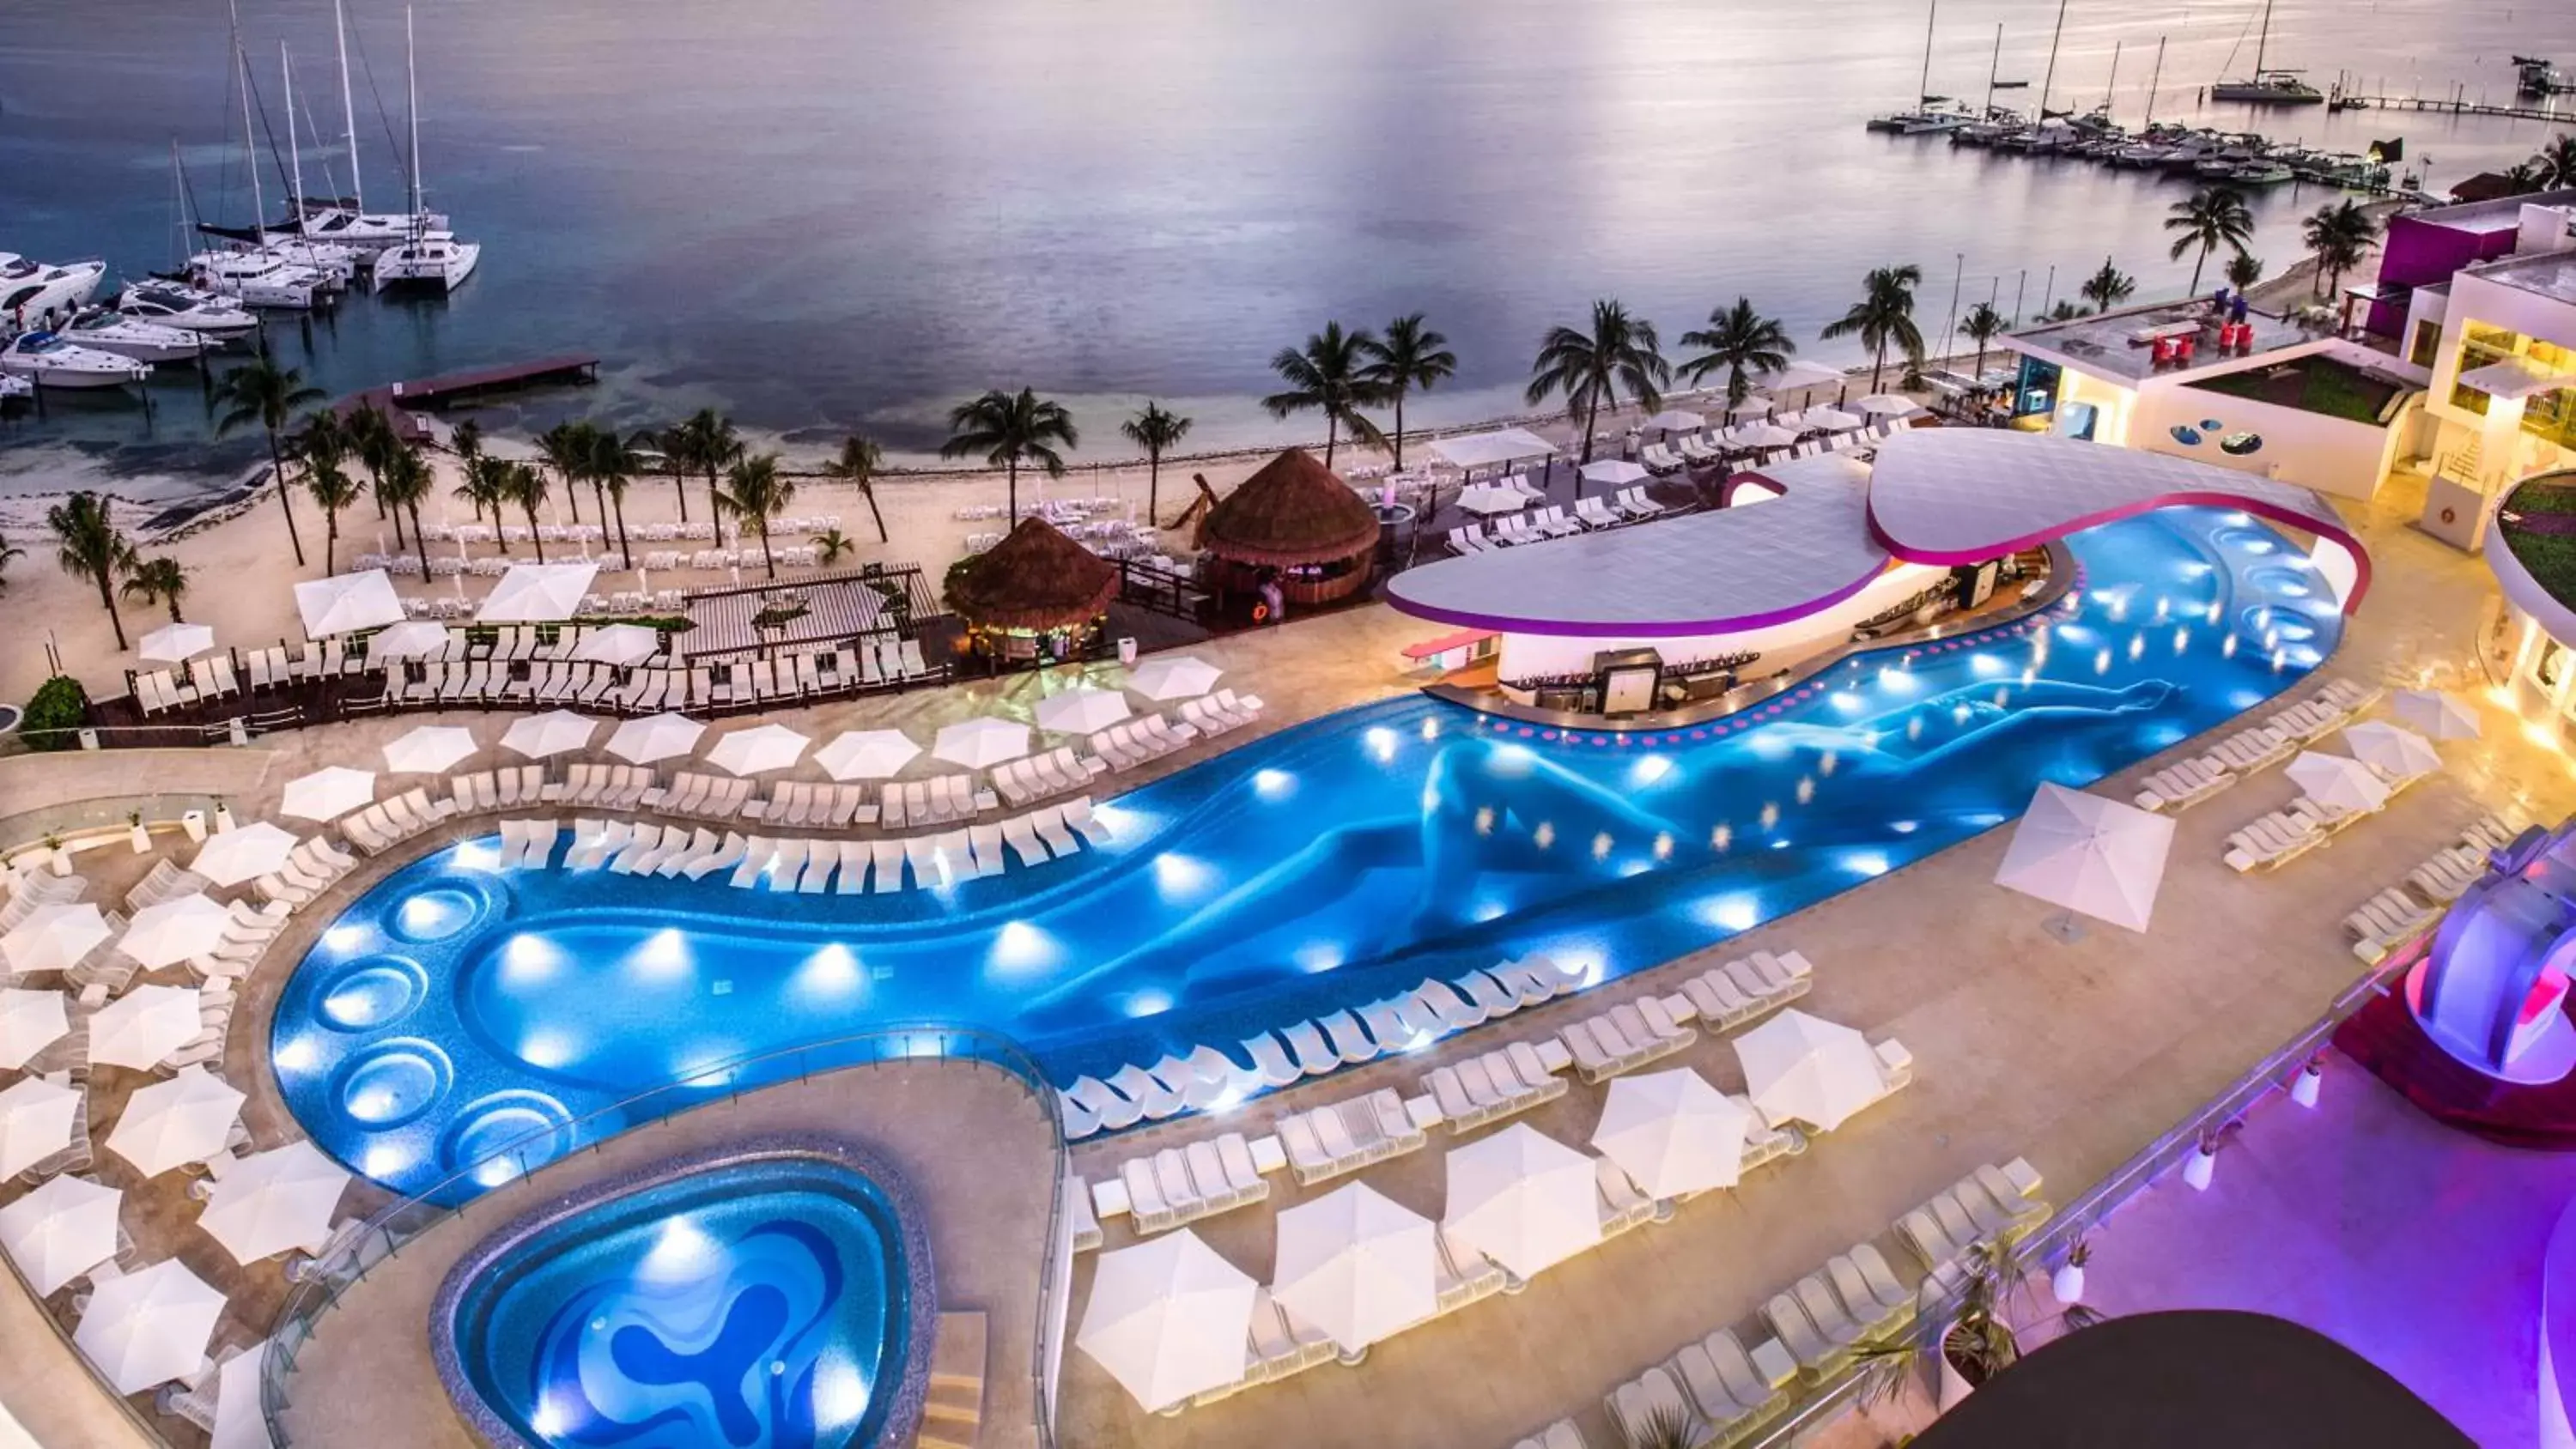 Bird's eye view, Pool View in Temptation Cancun Resort - All Inclusive - Adults Only